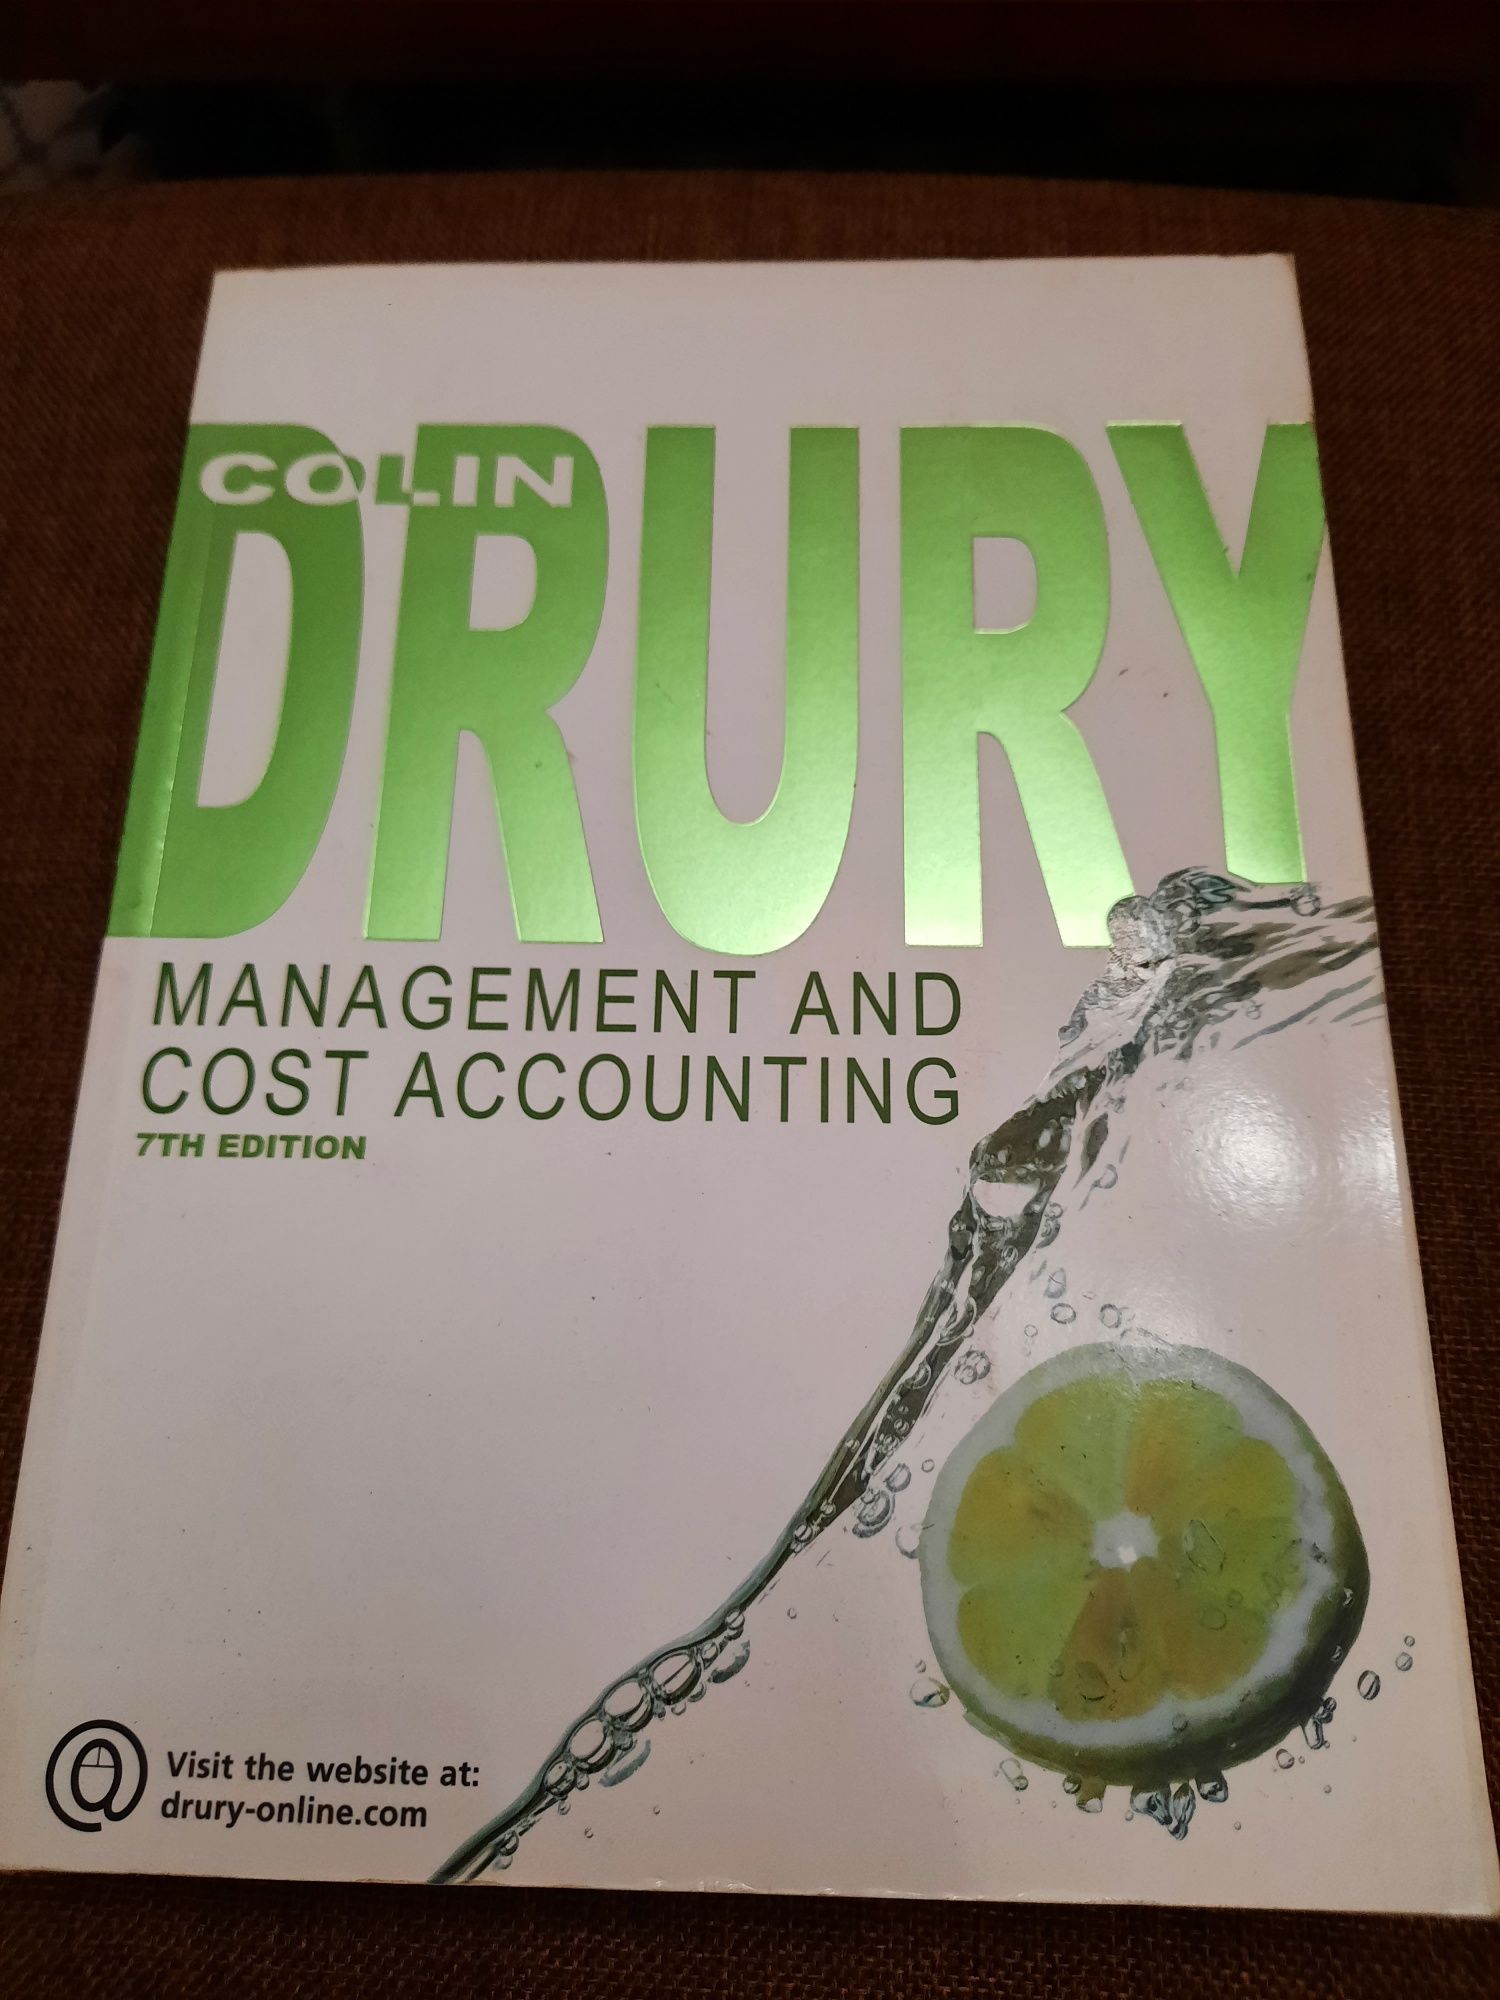 Livro management and cost accounting